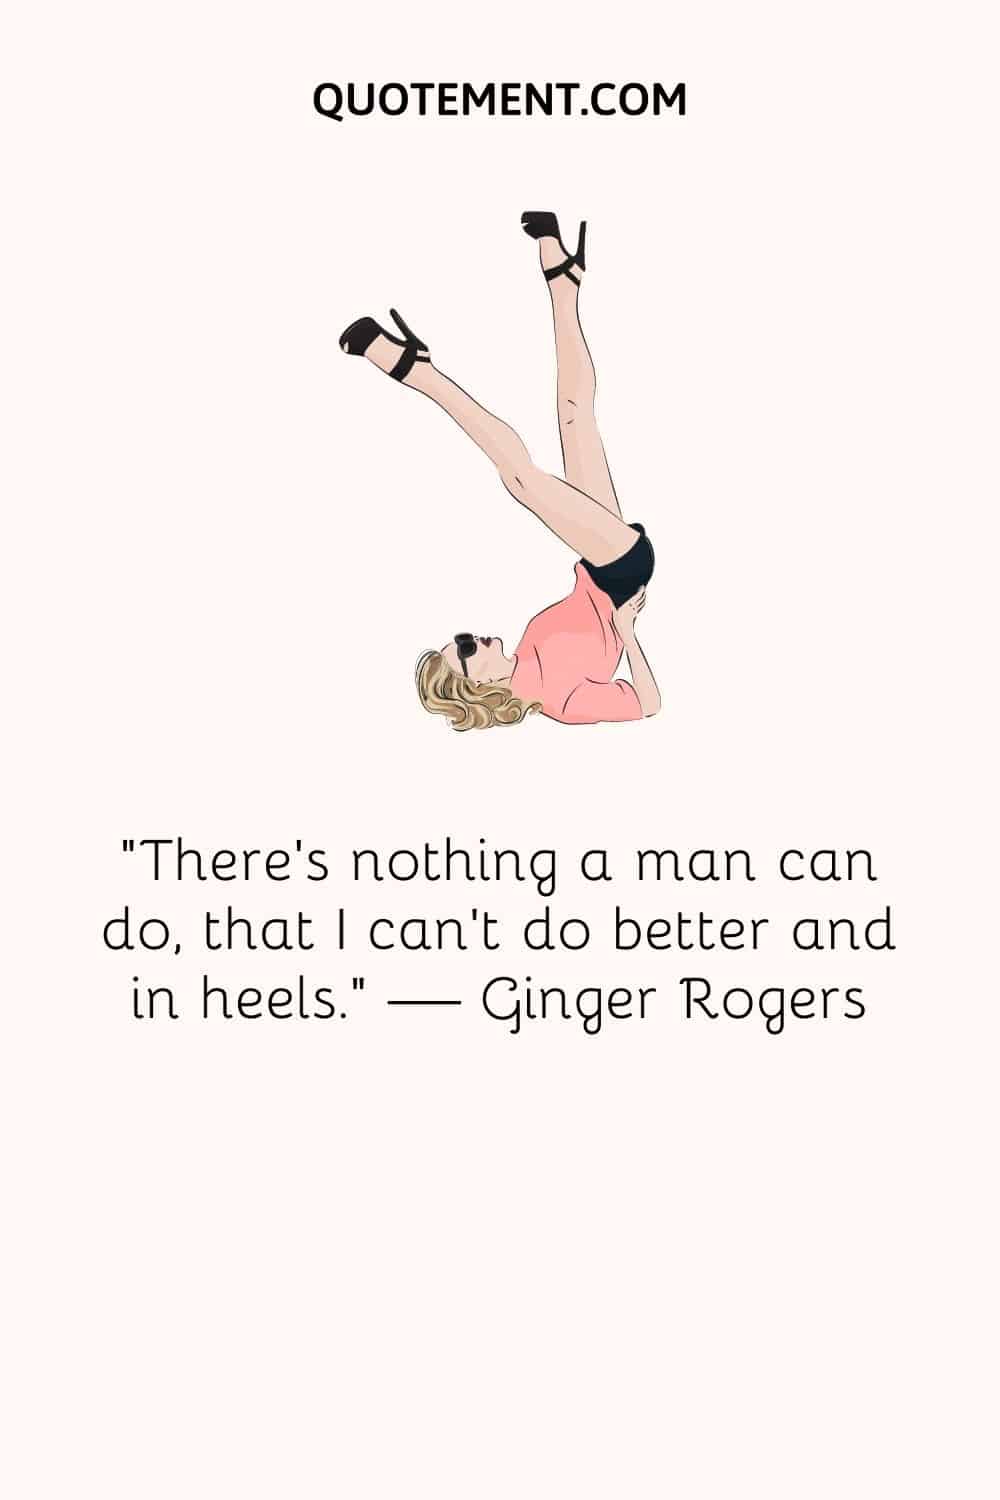 “There’s nothing a man can do, that I can’t do better and in heels.” — Ginger Rogers